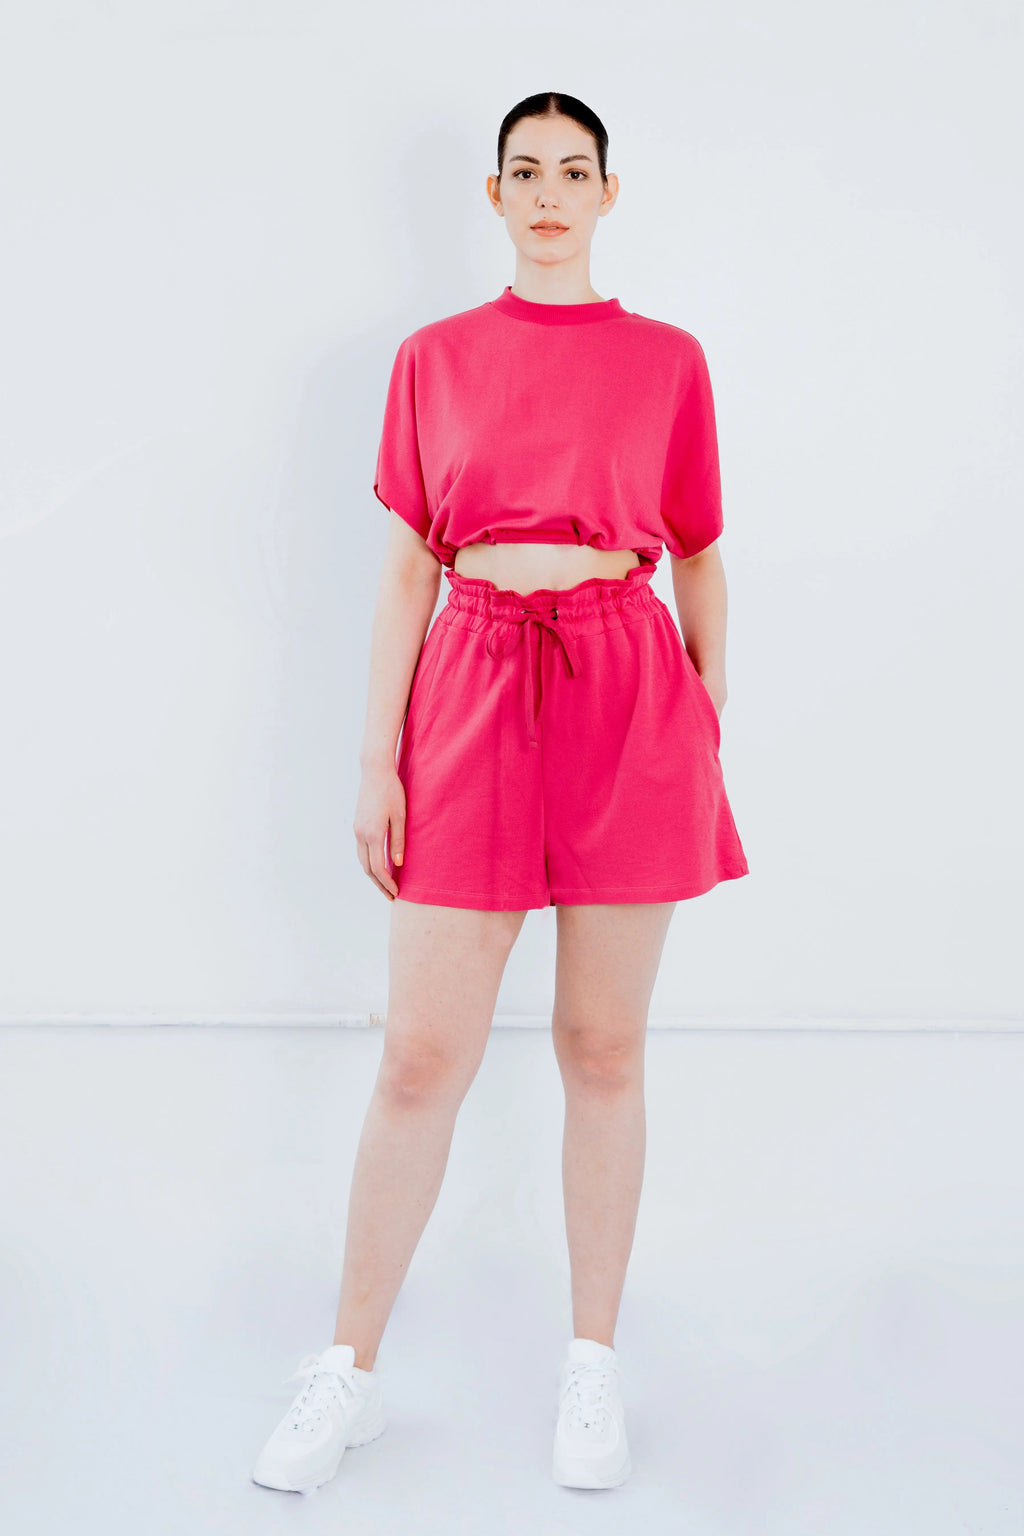 Upcycled - Playsuit - Shorts & Crop Top Set in Pink